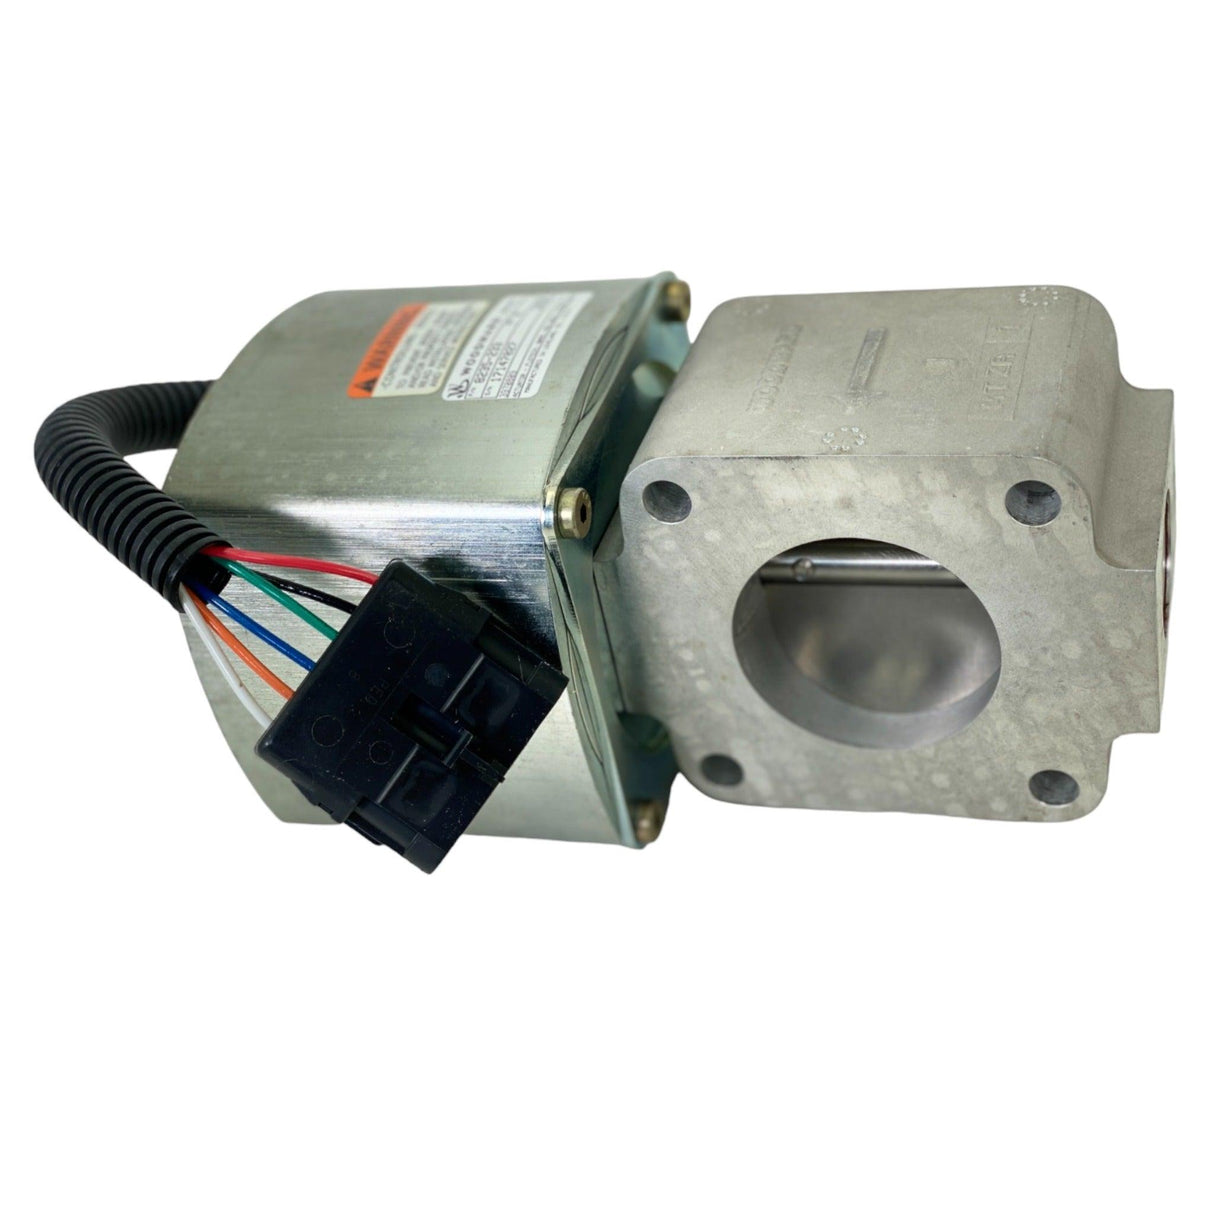 8235-233 Genuine Woodward® 14-Pin L10 Elc Governor Actuator.